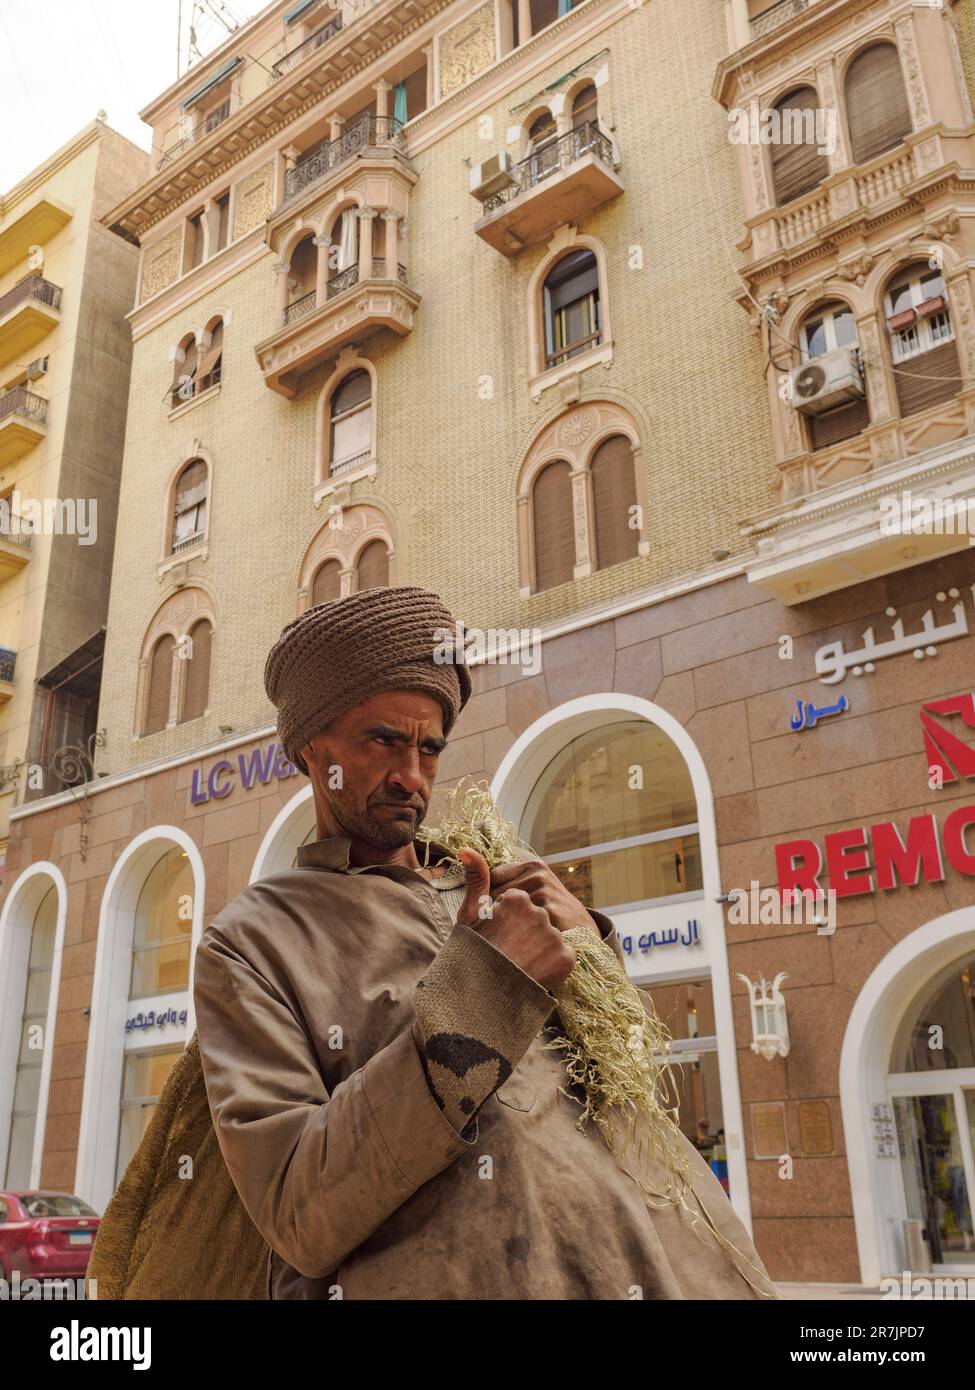 Man in Turban and Poor Clothes on Cairo Street, Near Historic Bu Stock Photo